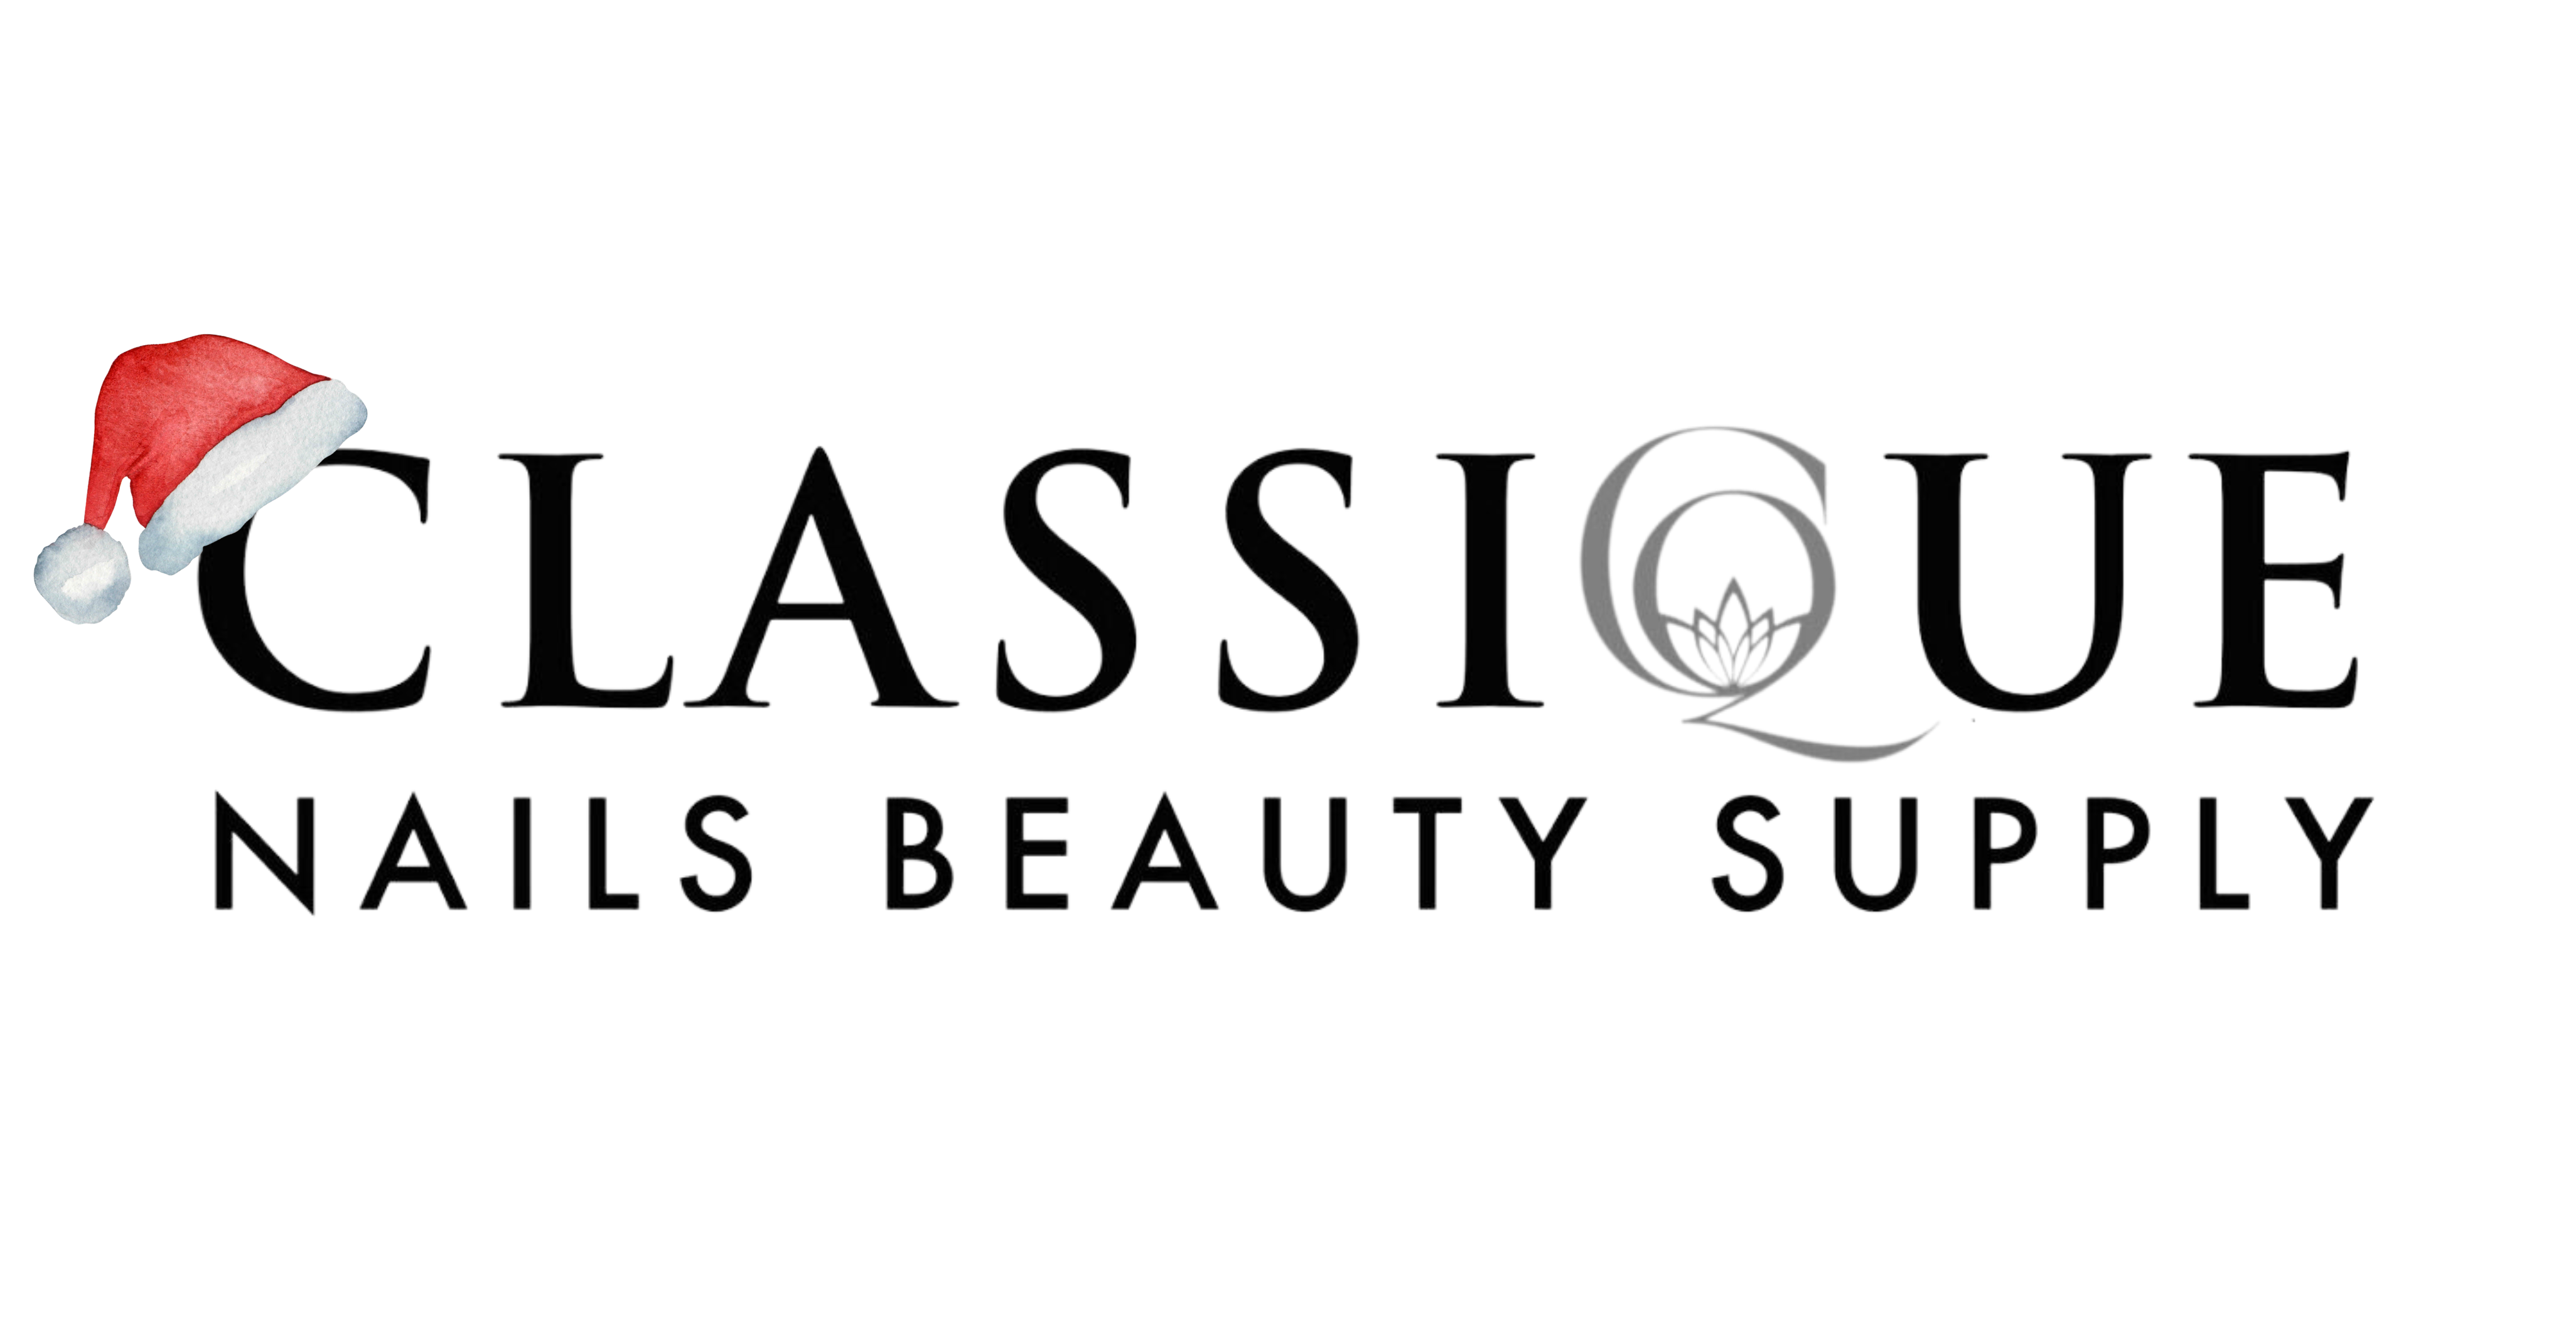 Holbein - Classique Nails Beauty Supply Inc.